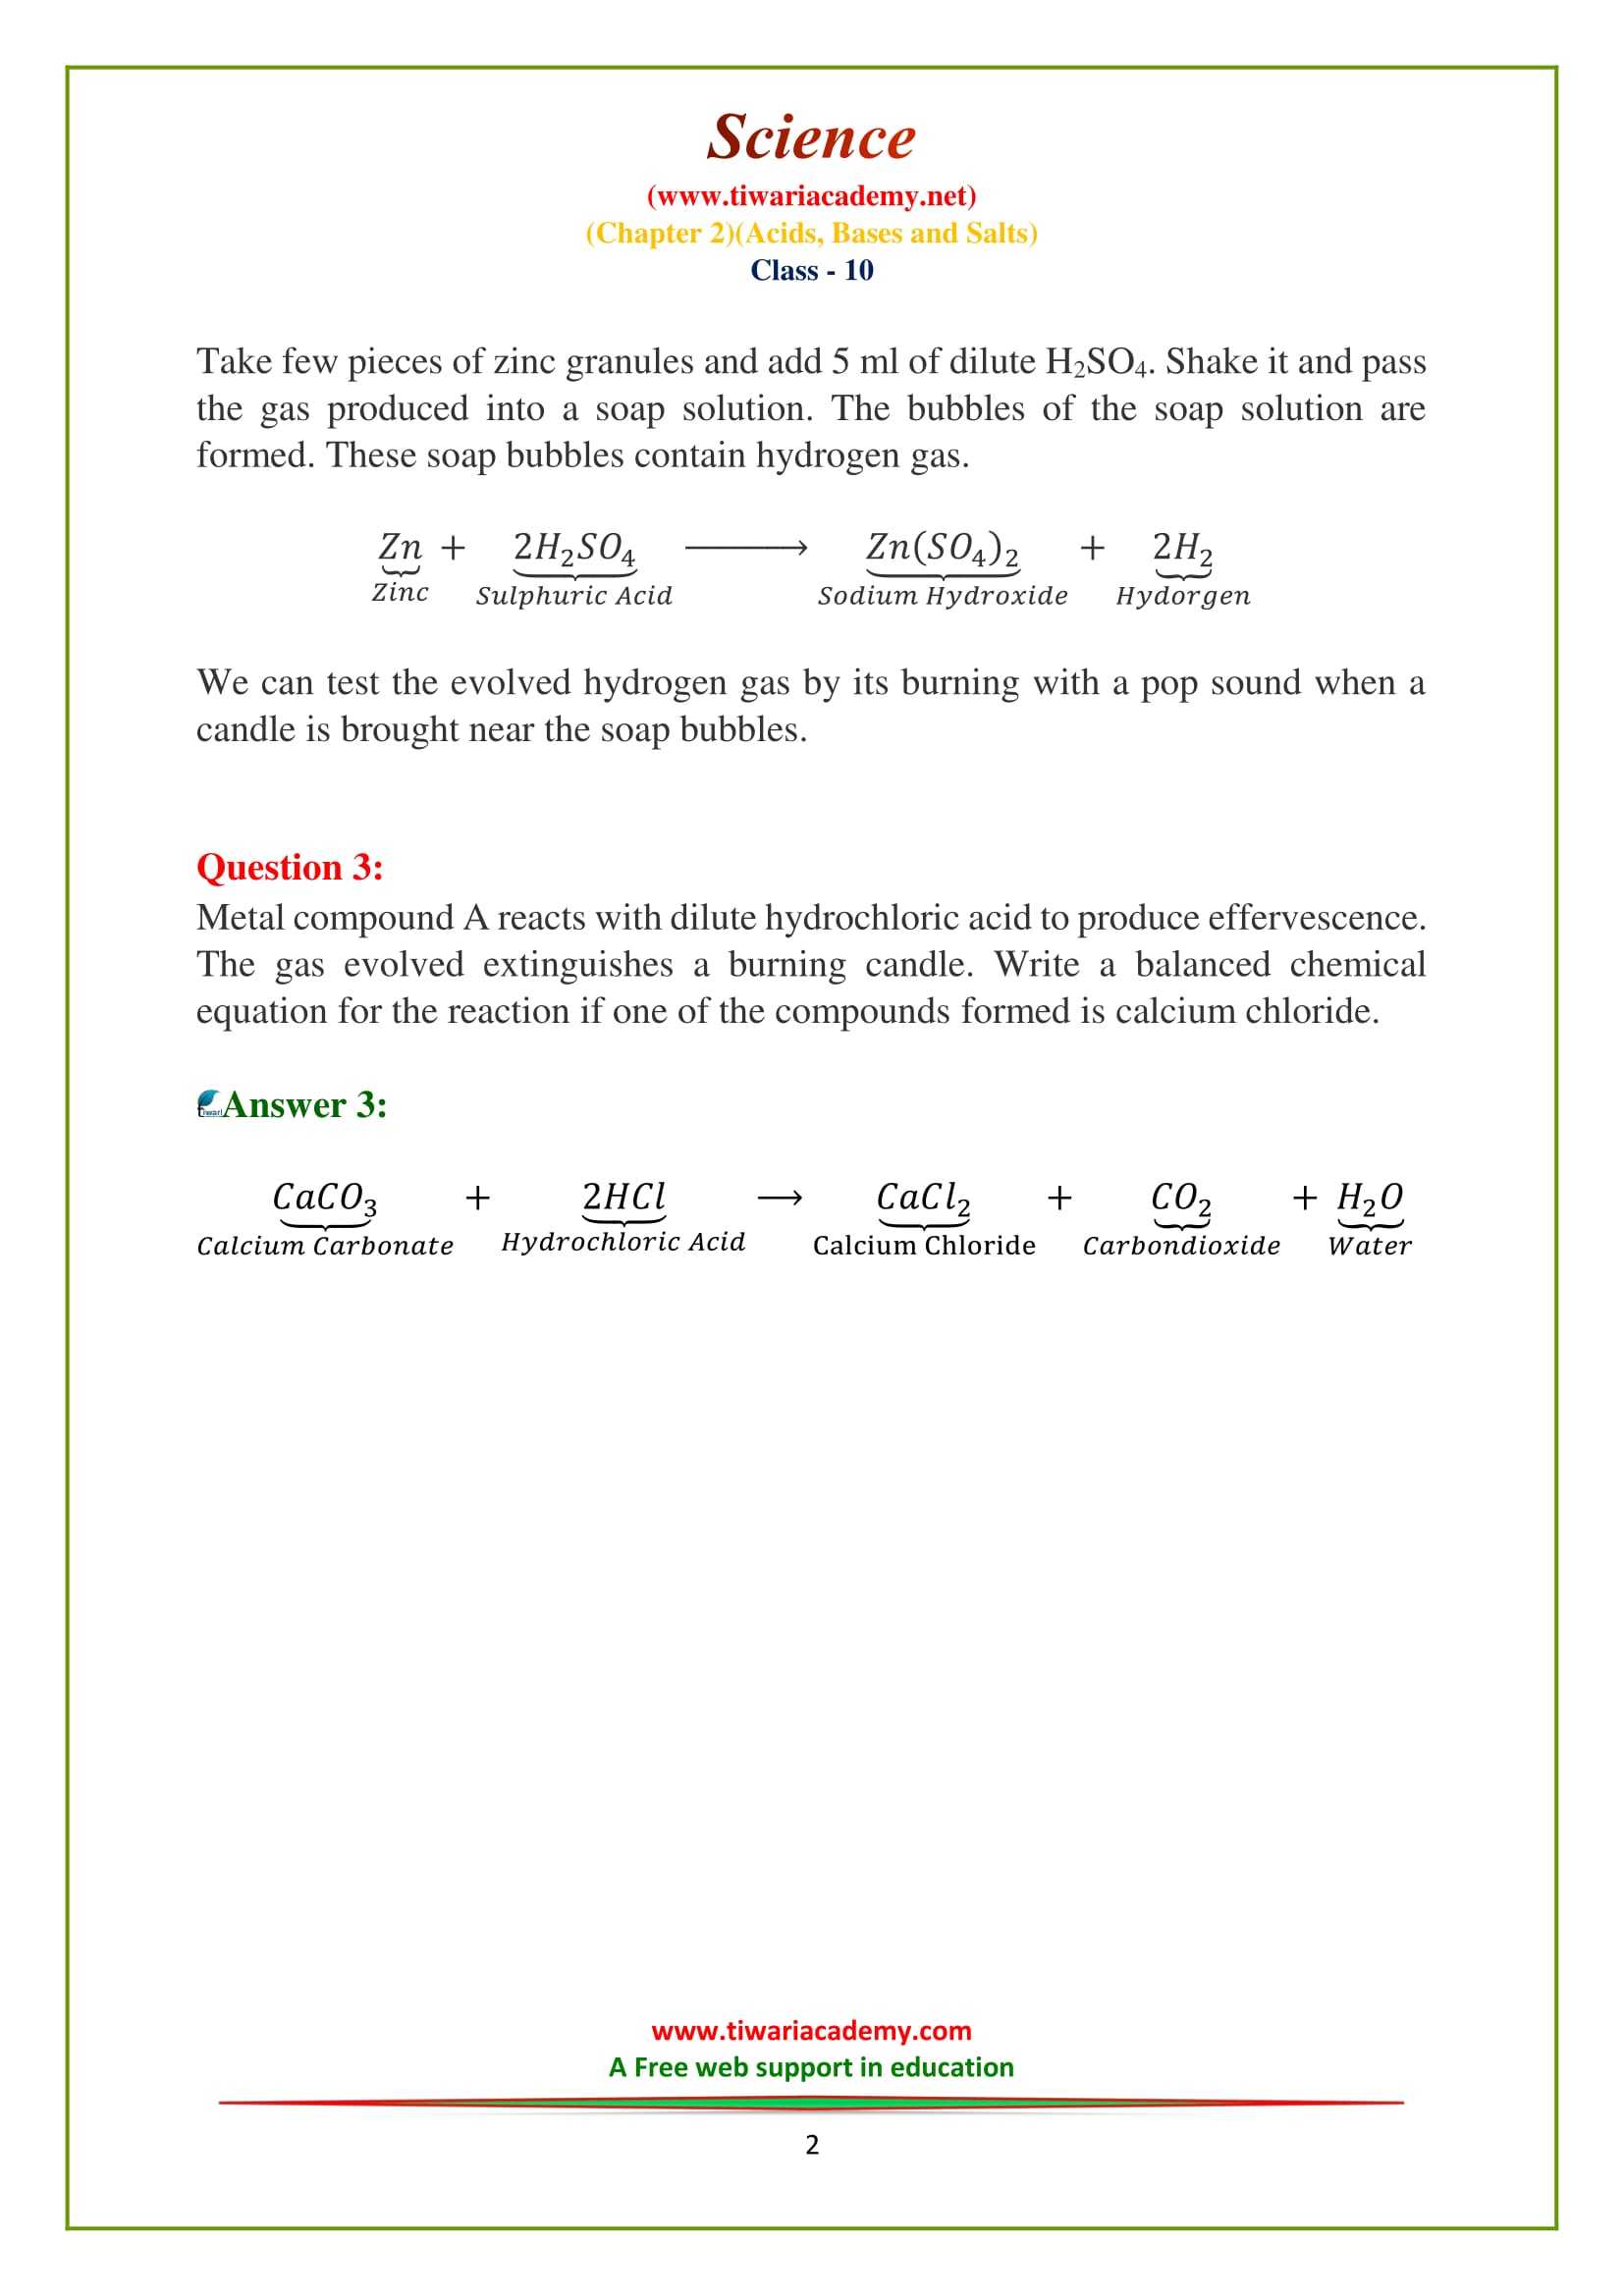 Balancing Chemical Equations Worksheet with Answers Grade 10 with Ncert solutions for Class 10 Science Chapter 2 Acids Bases & Salts